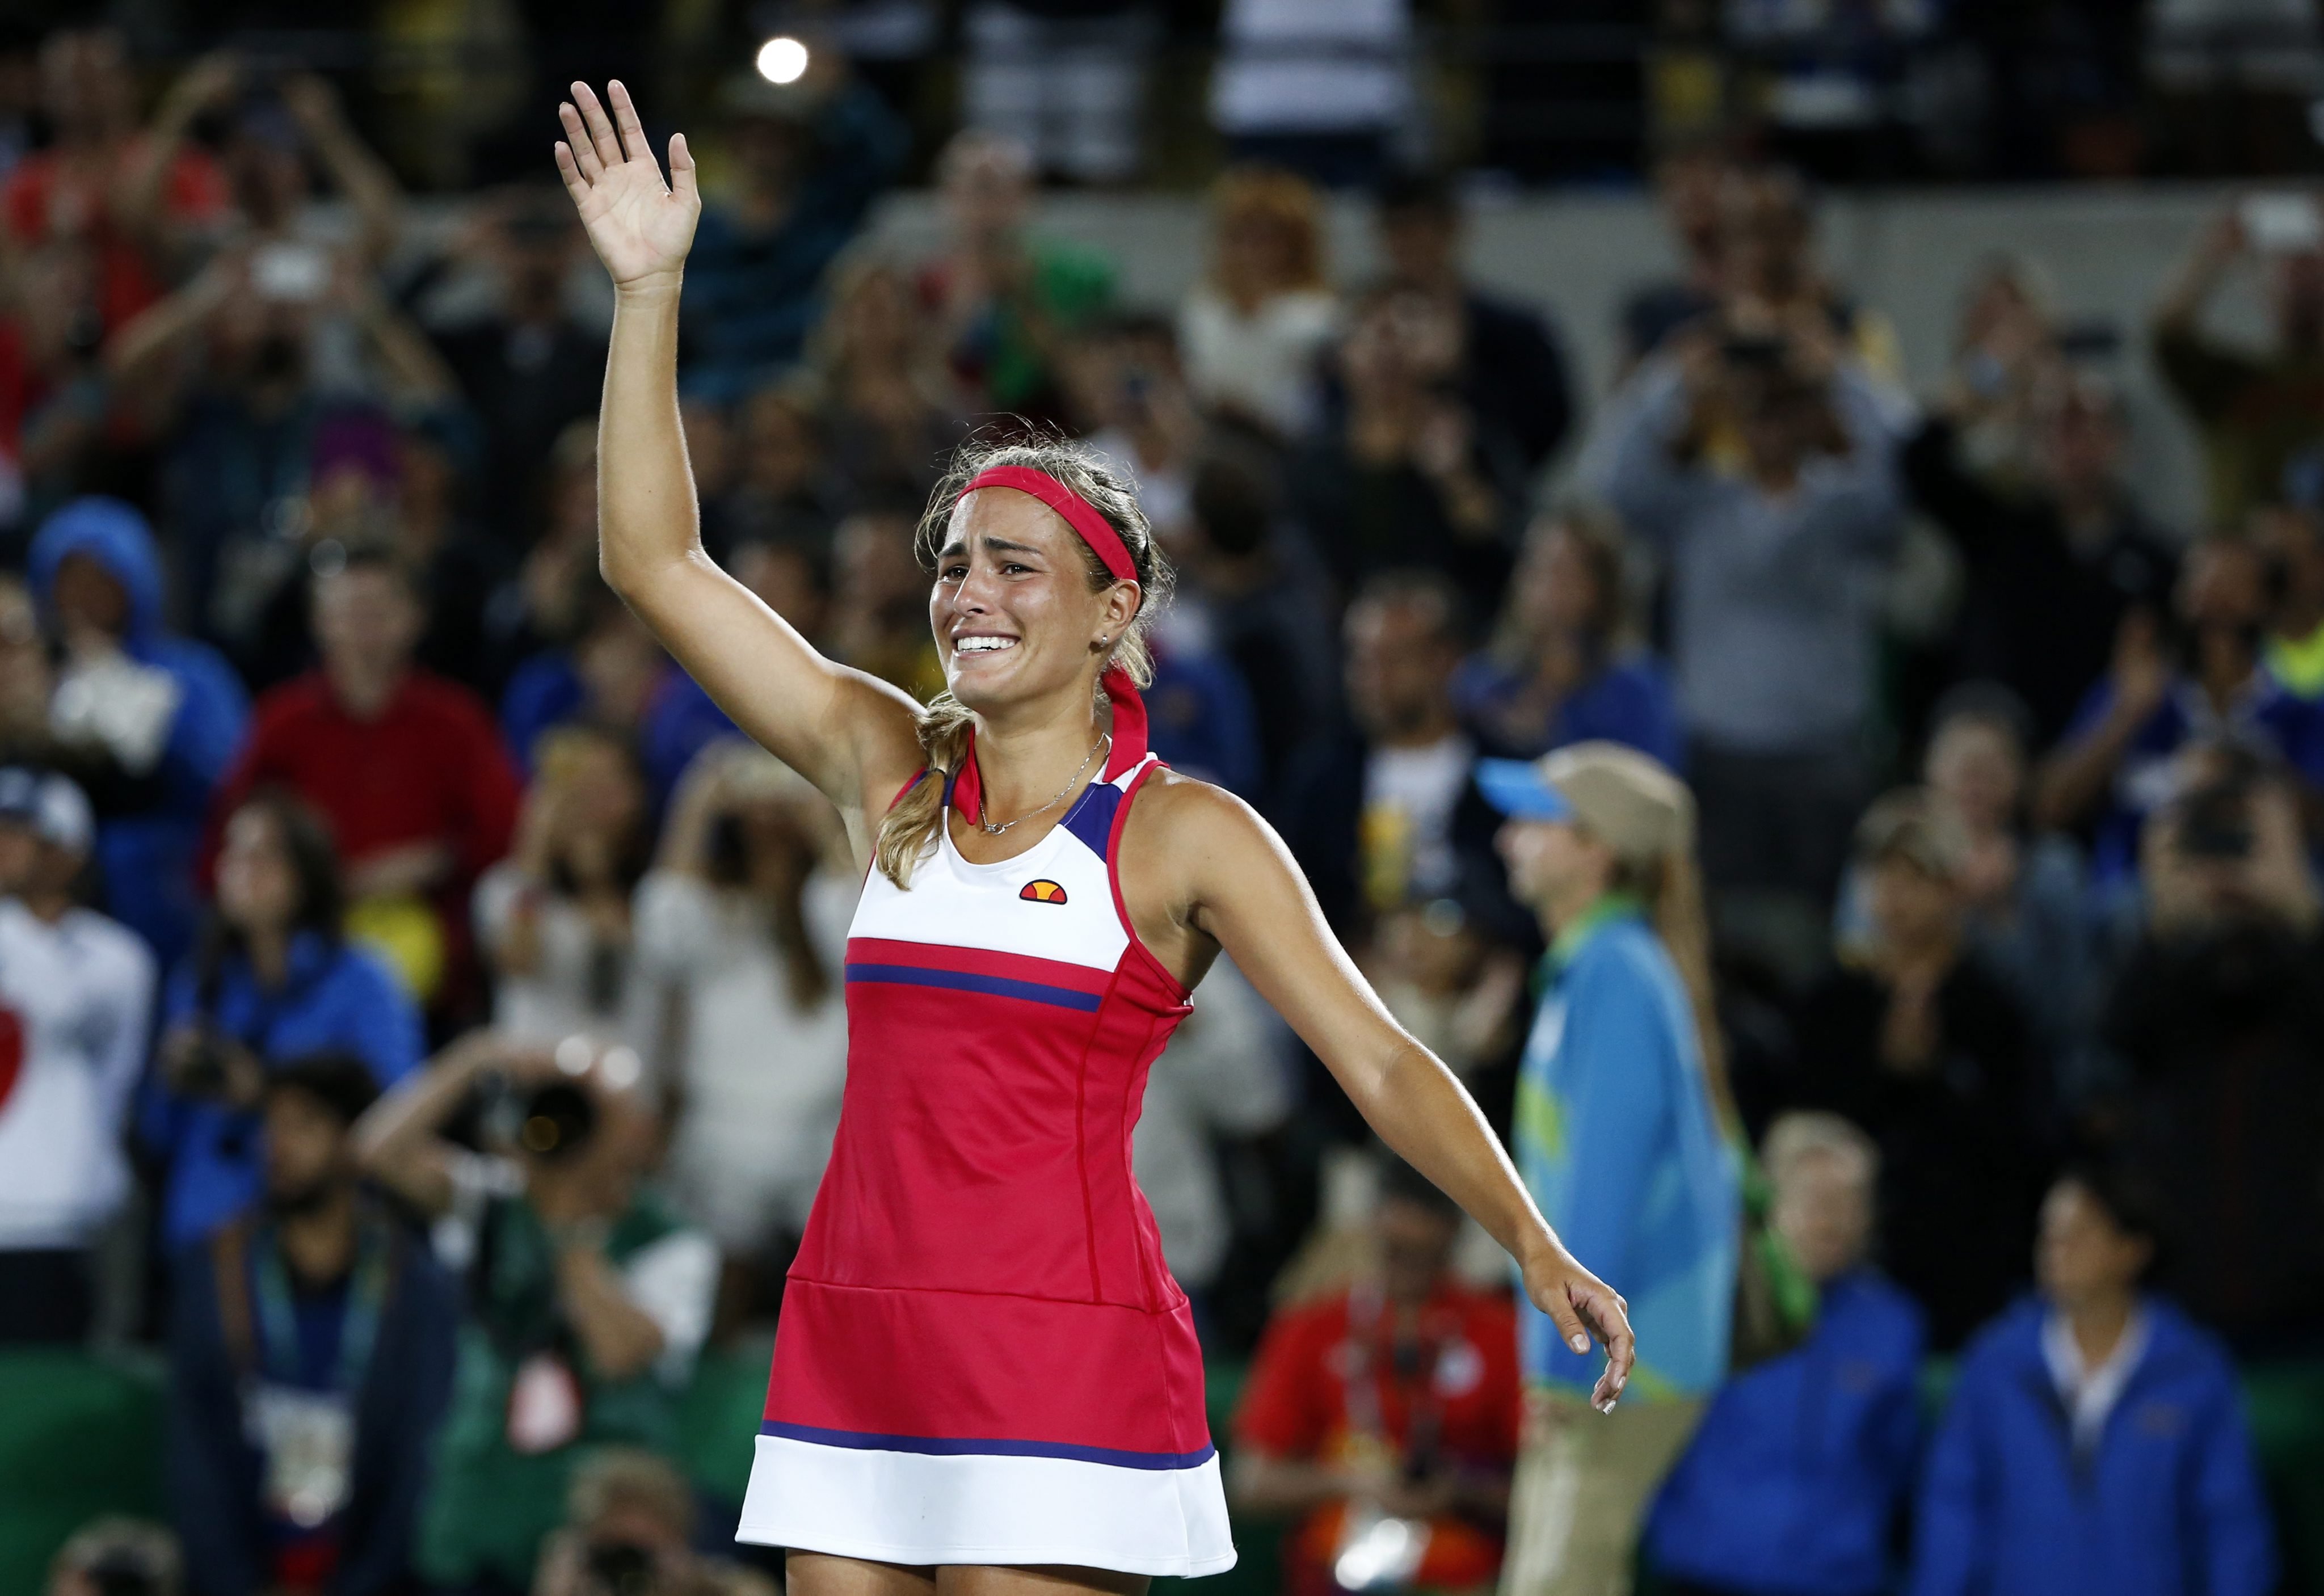 Monica Puig of Puerto Rico celebrates defeating Angelique Kerber of Germany during the women's Singles Gold medal match of the Rio 2016 Olympic Games Tennis events at the Olympic Tennis Centre in the Olympic Park in Rio de Janeiro on Aug. 13, 2016. (Michael Reynolds—EPA)